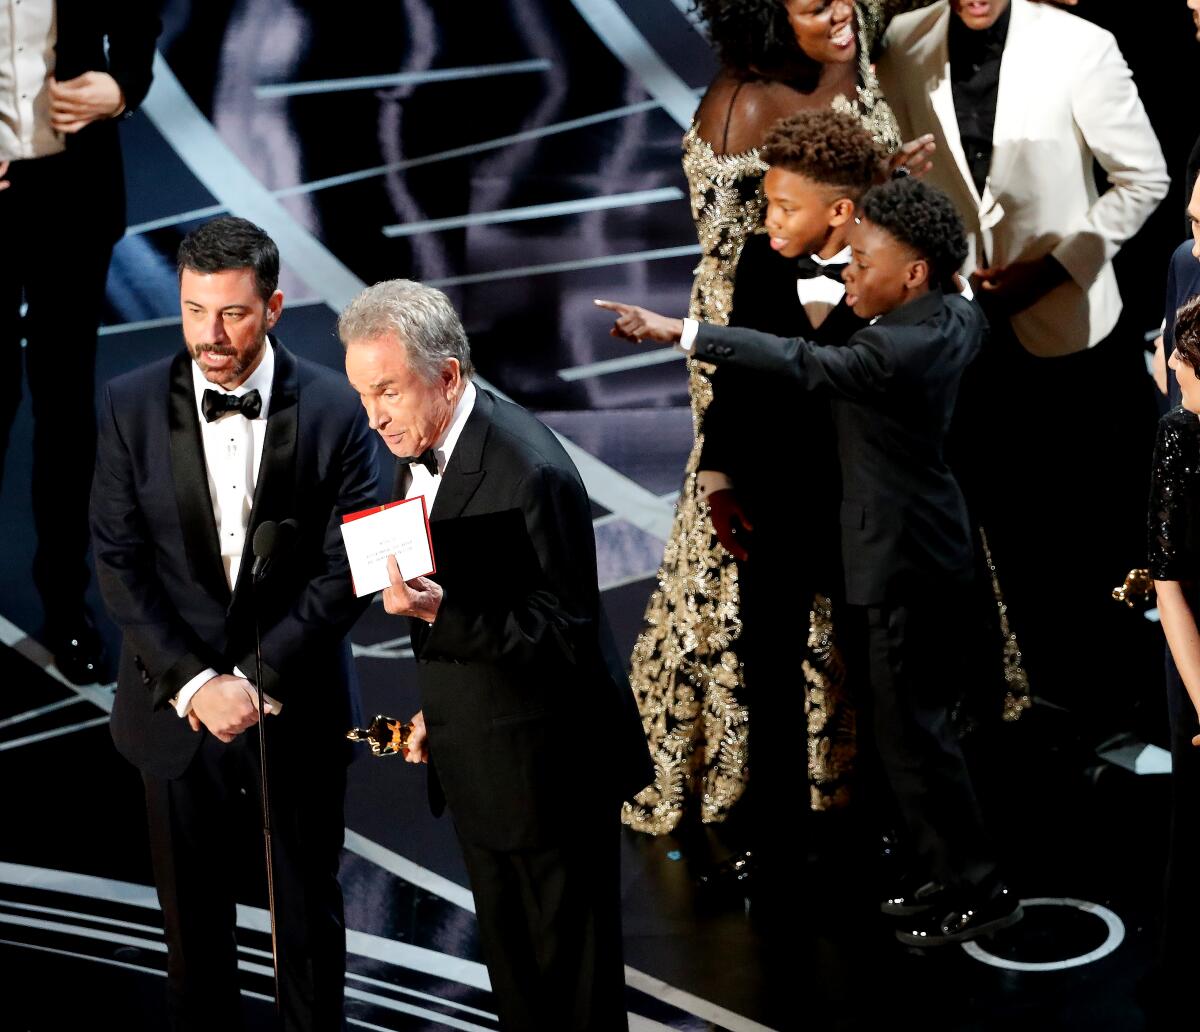 Jimmy Kimmel stands on stage with Warren Beatty and the casts on "Moonlight" and "La La Land."